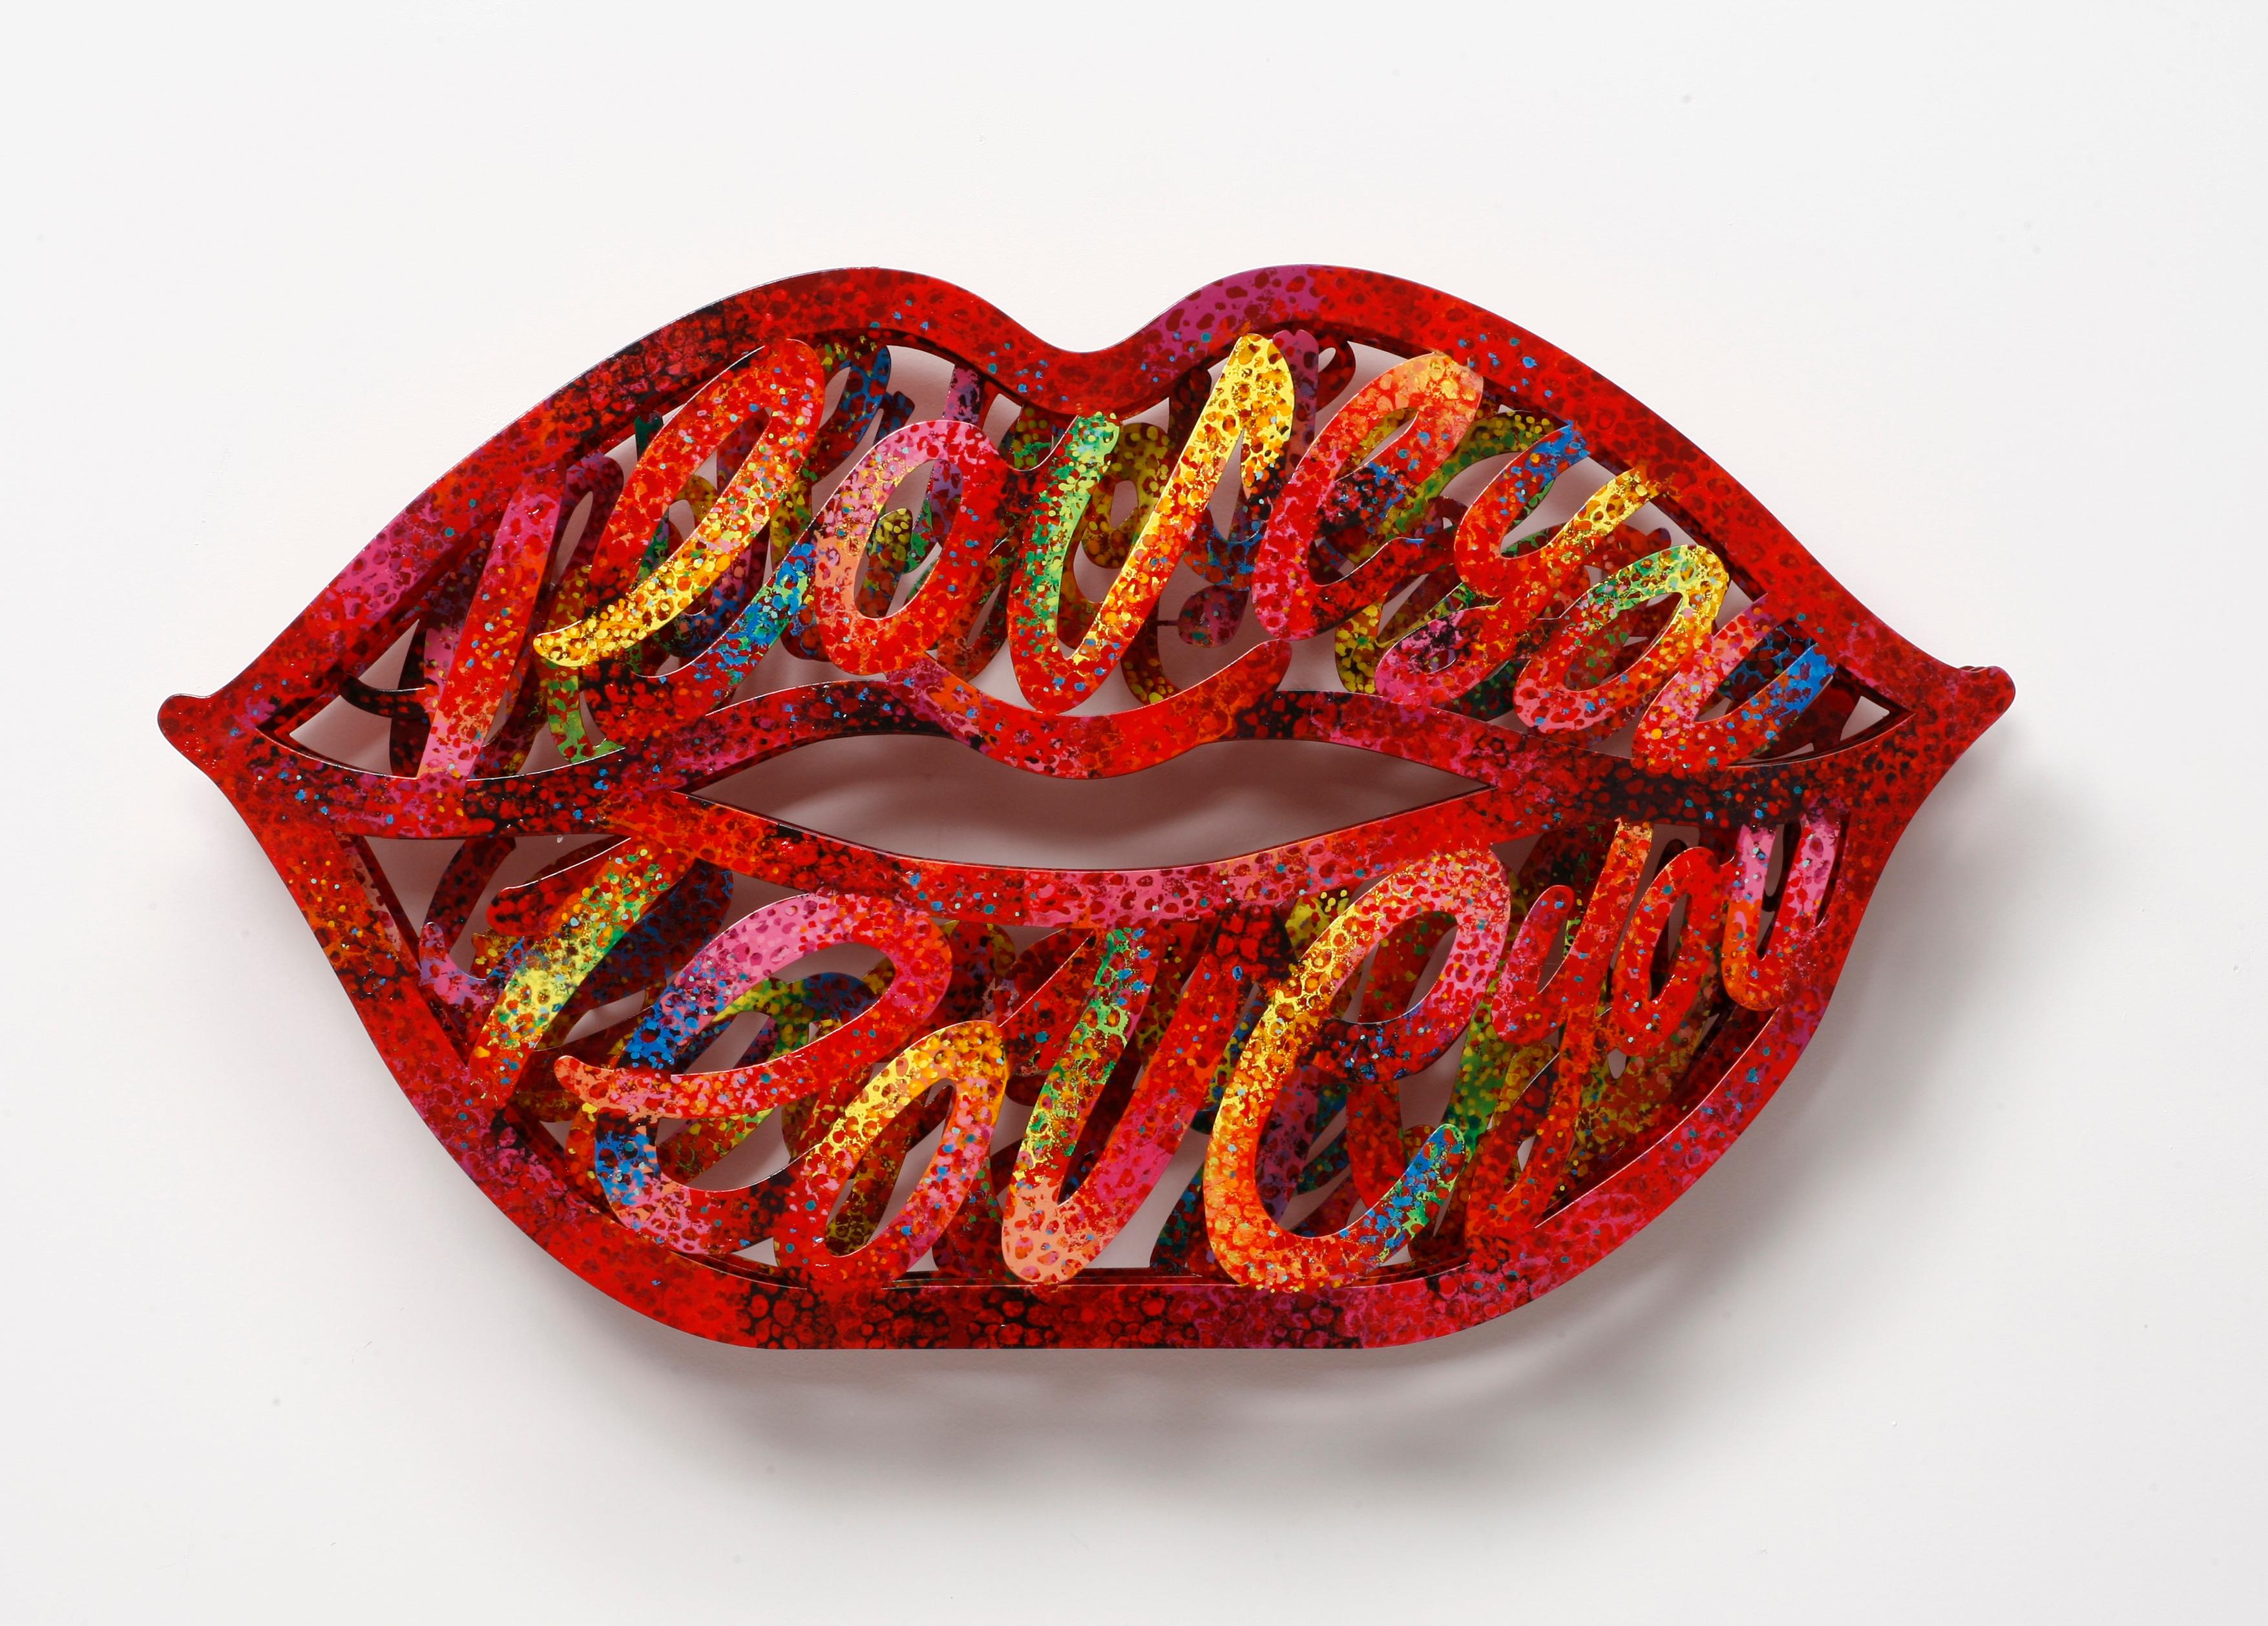 "Read My Lips", 3D Hand-painted Metal Wall Sculpture 